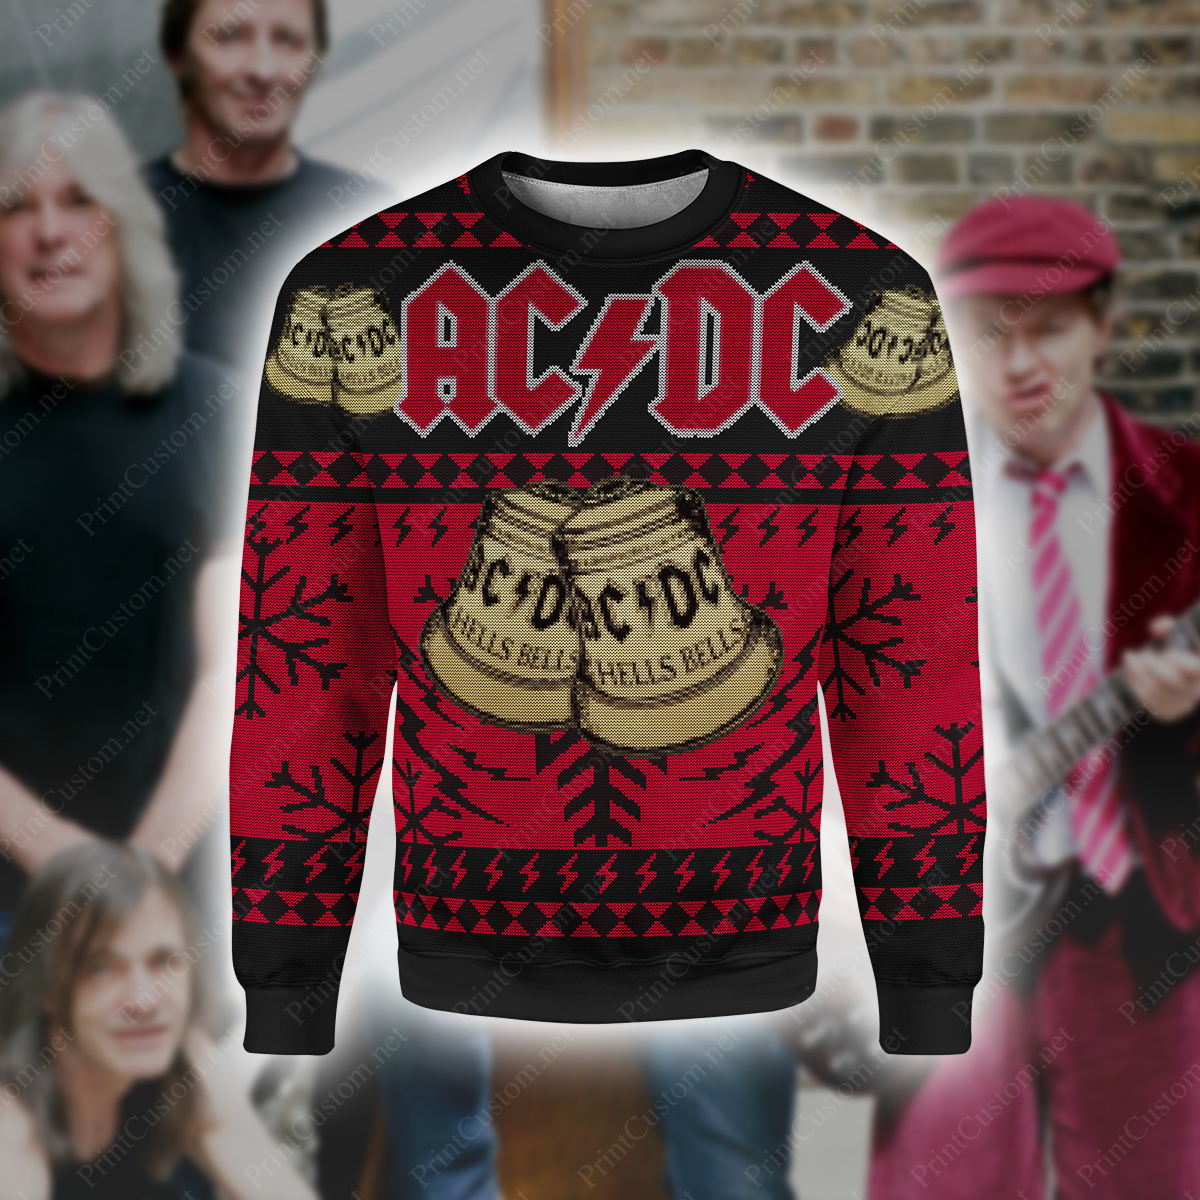 ACDC hells bells full printing ugly christmas sweater 4